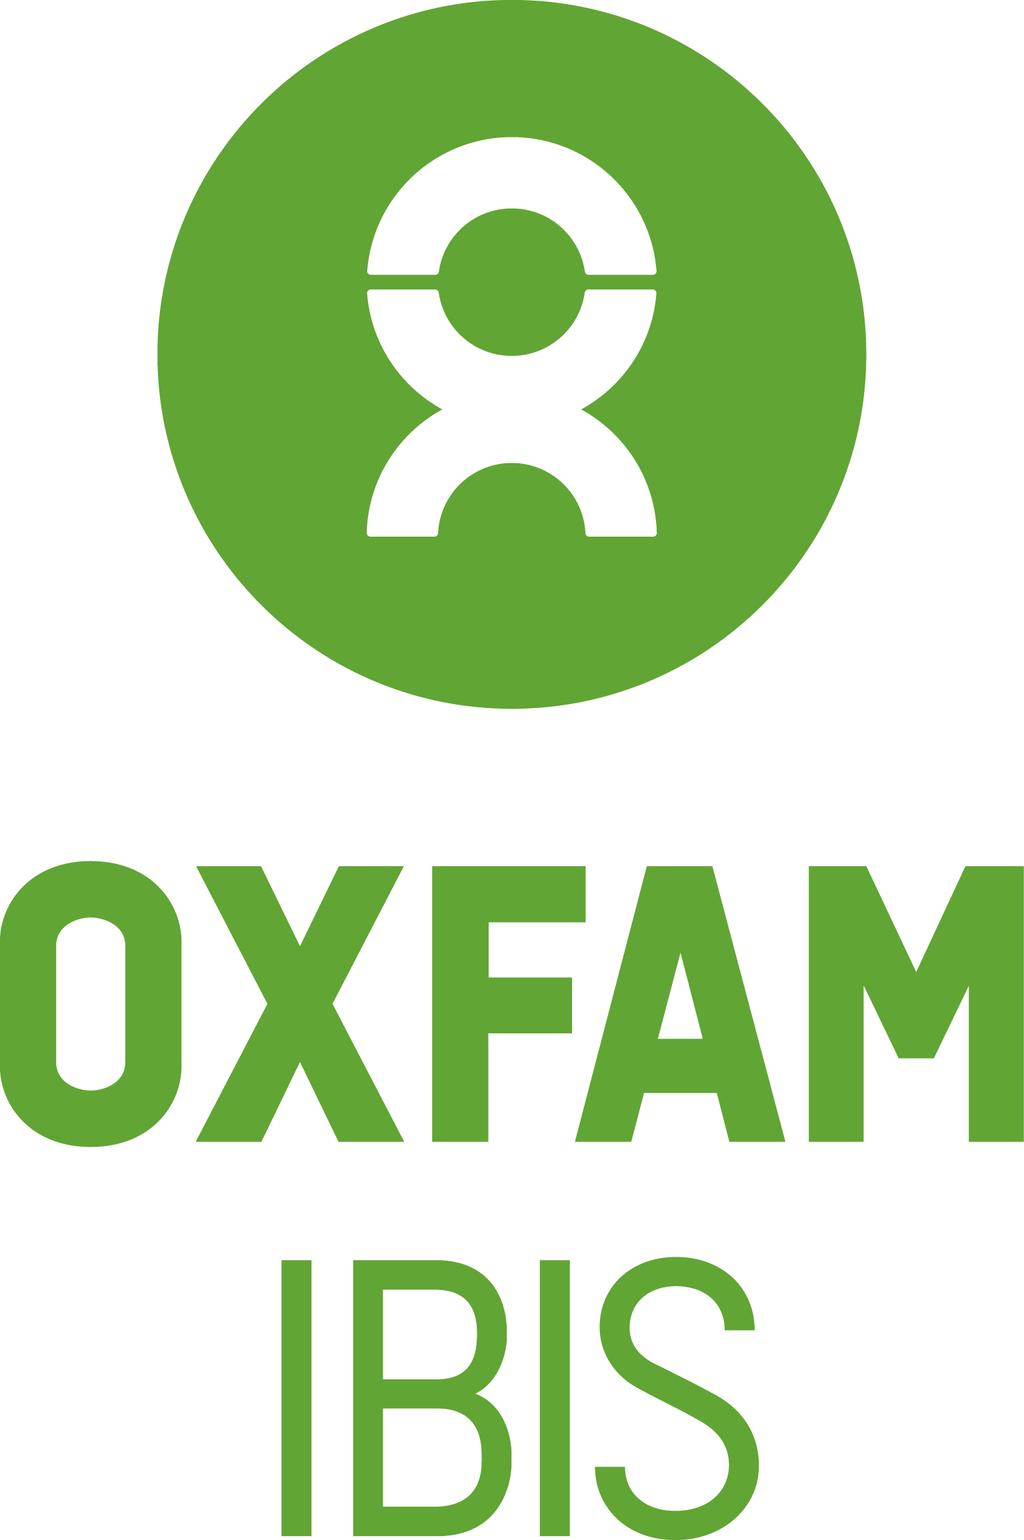 Oxfam IBIS analysis of Denmark s financing of in-donor refugee costs (December 2016) New figures confirm that the Danish government is increasing its in-donor refugee spending from the aid budget,